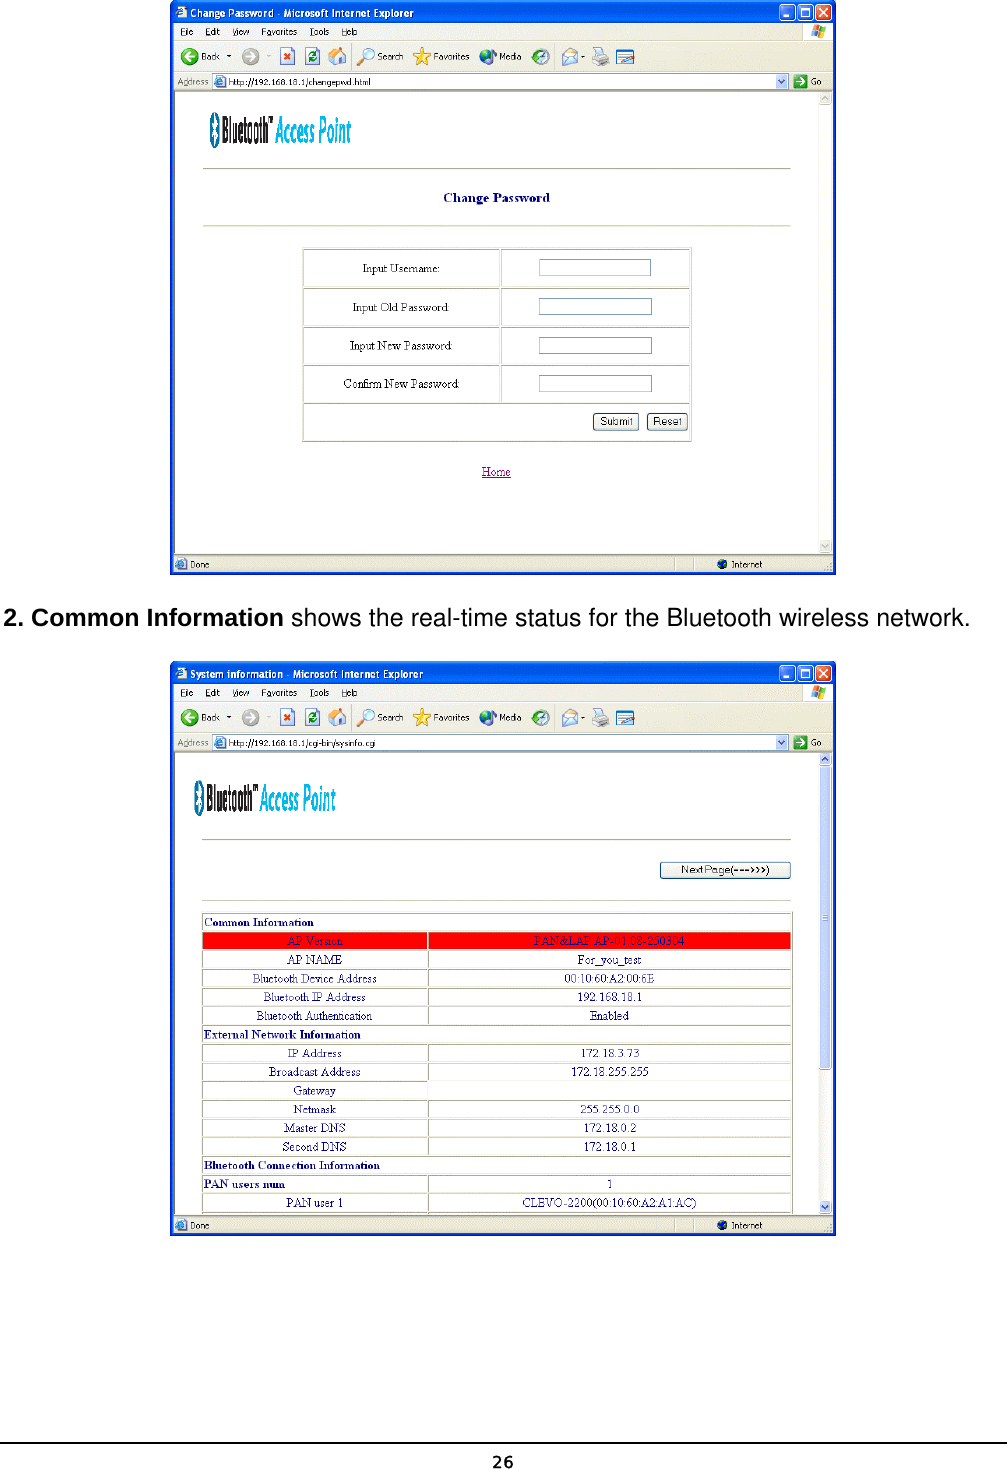   26 2. Common Information shows the real-time status for the Bluetooth wireless network.  